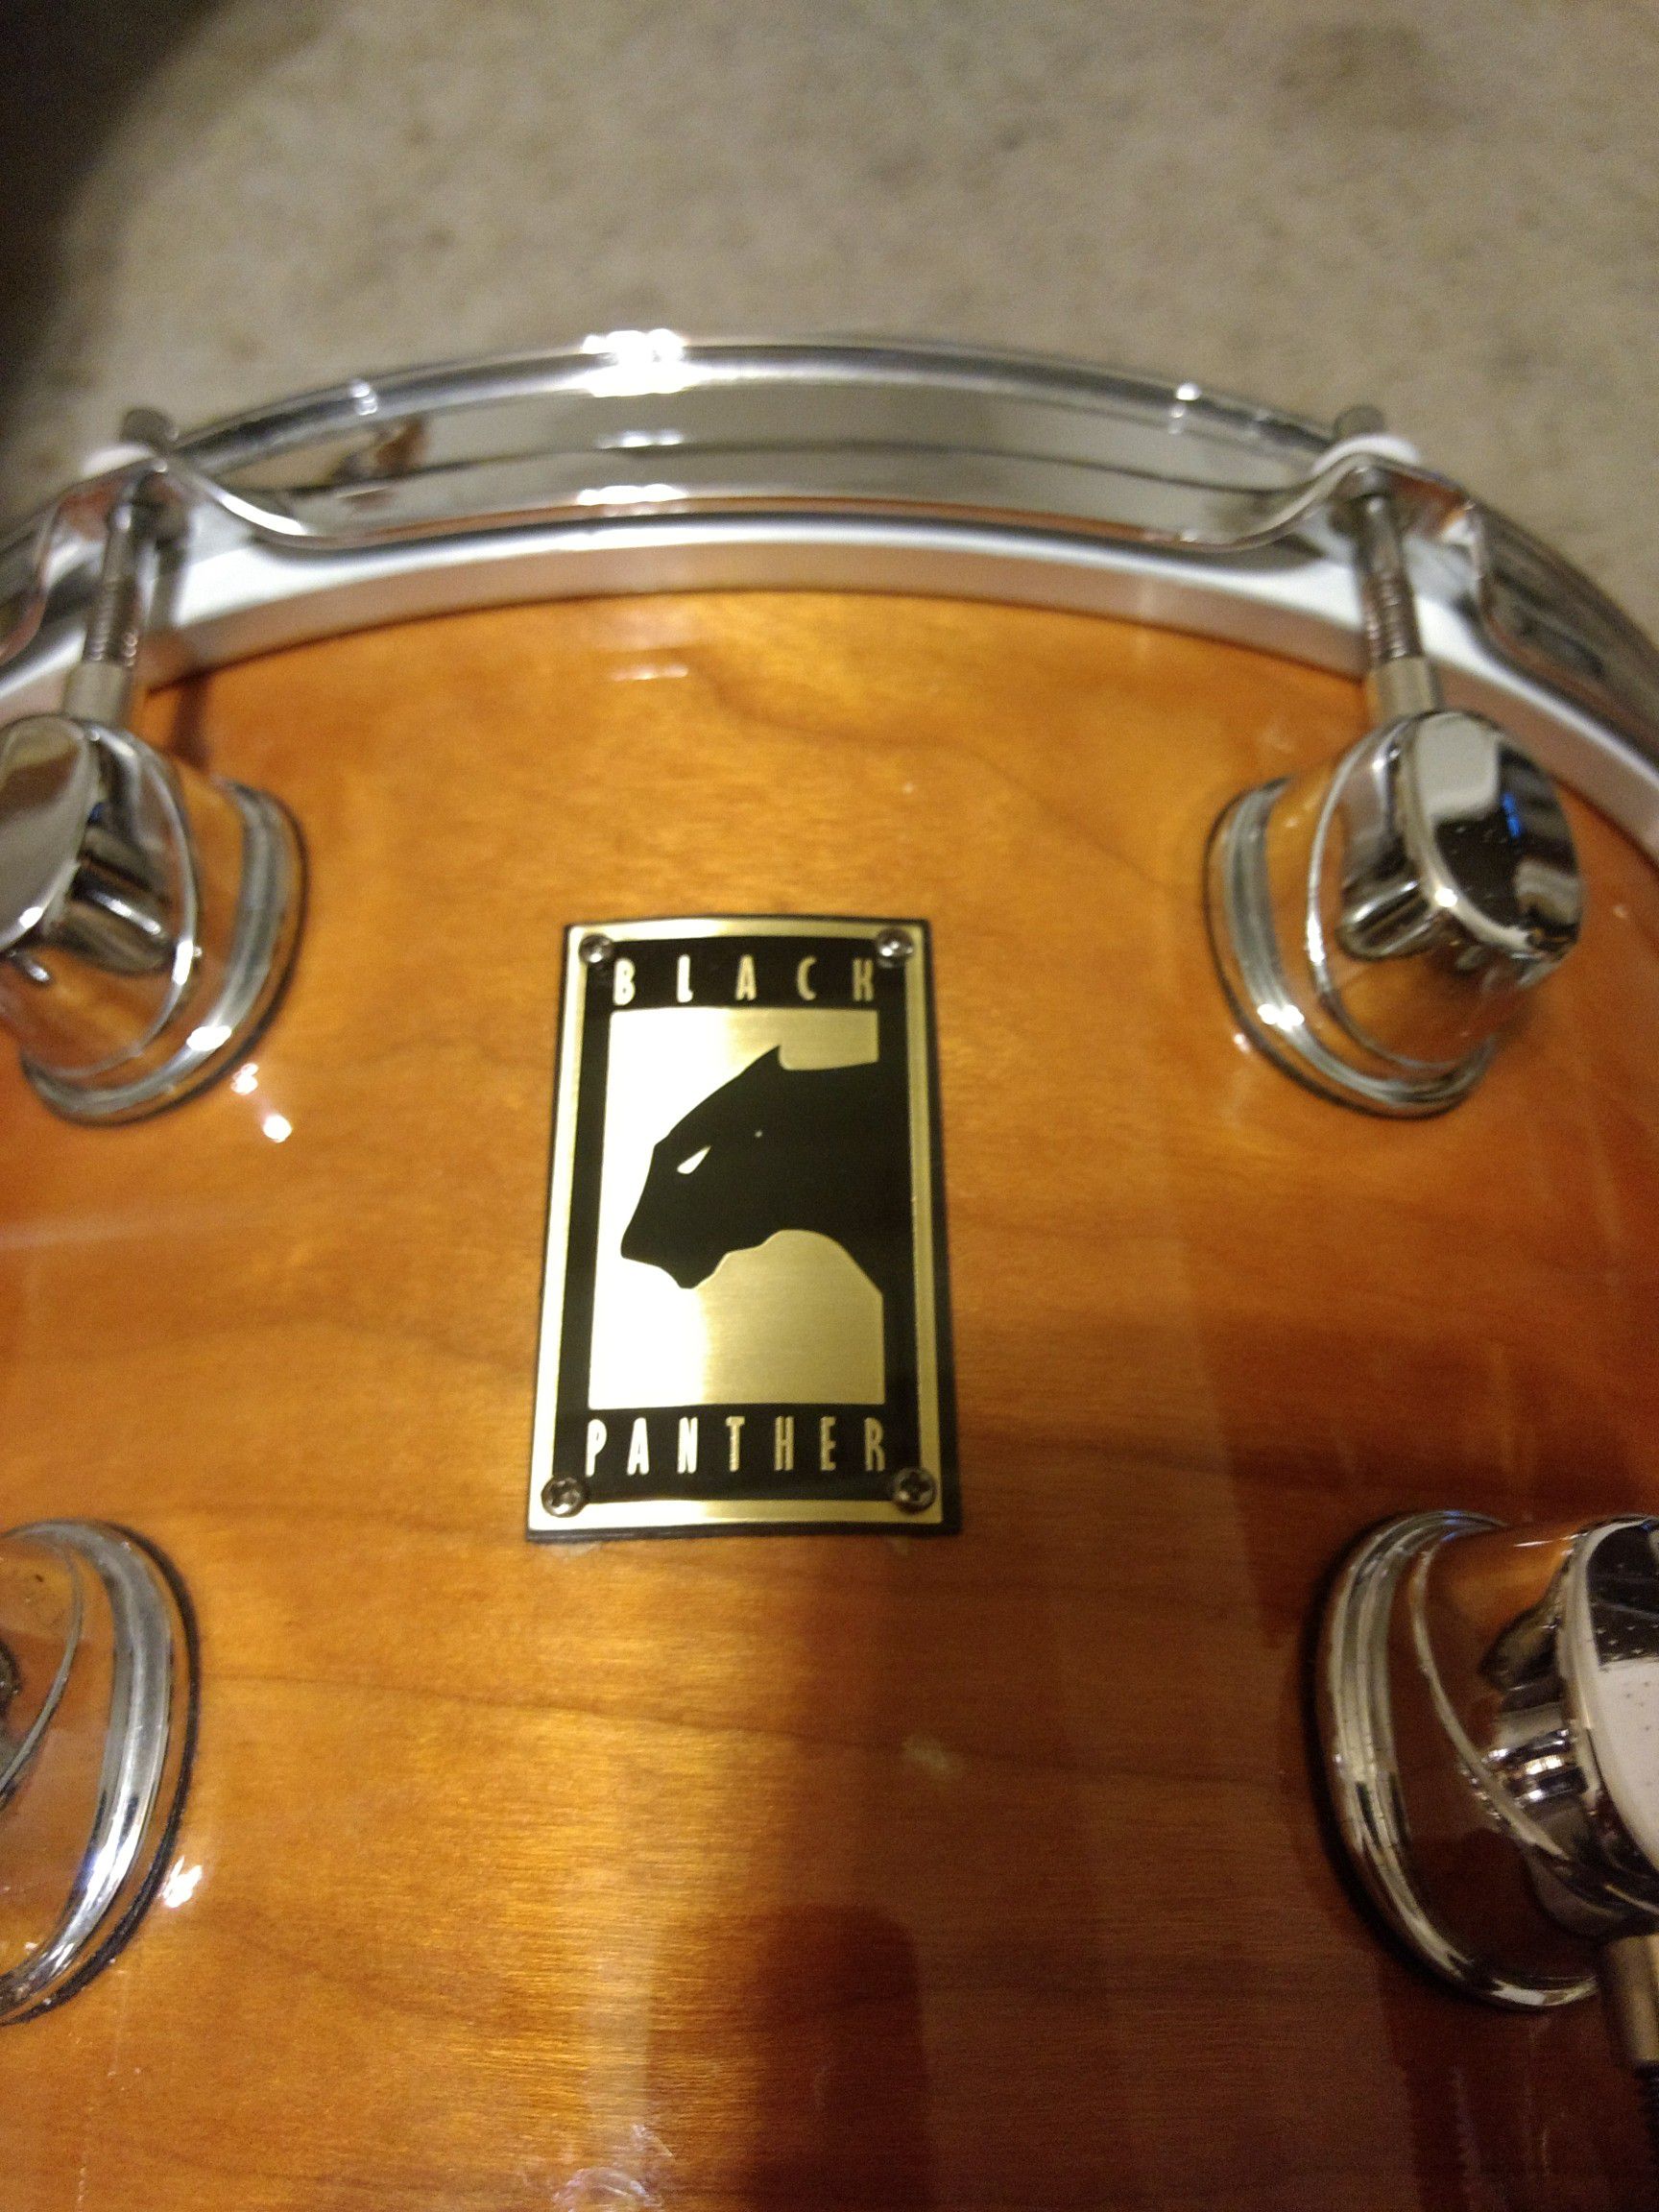 Mapex Black panther snare 12x7 maple